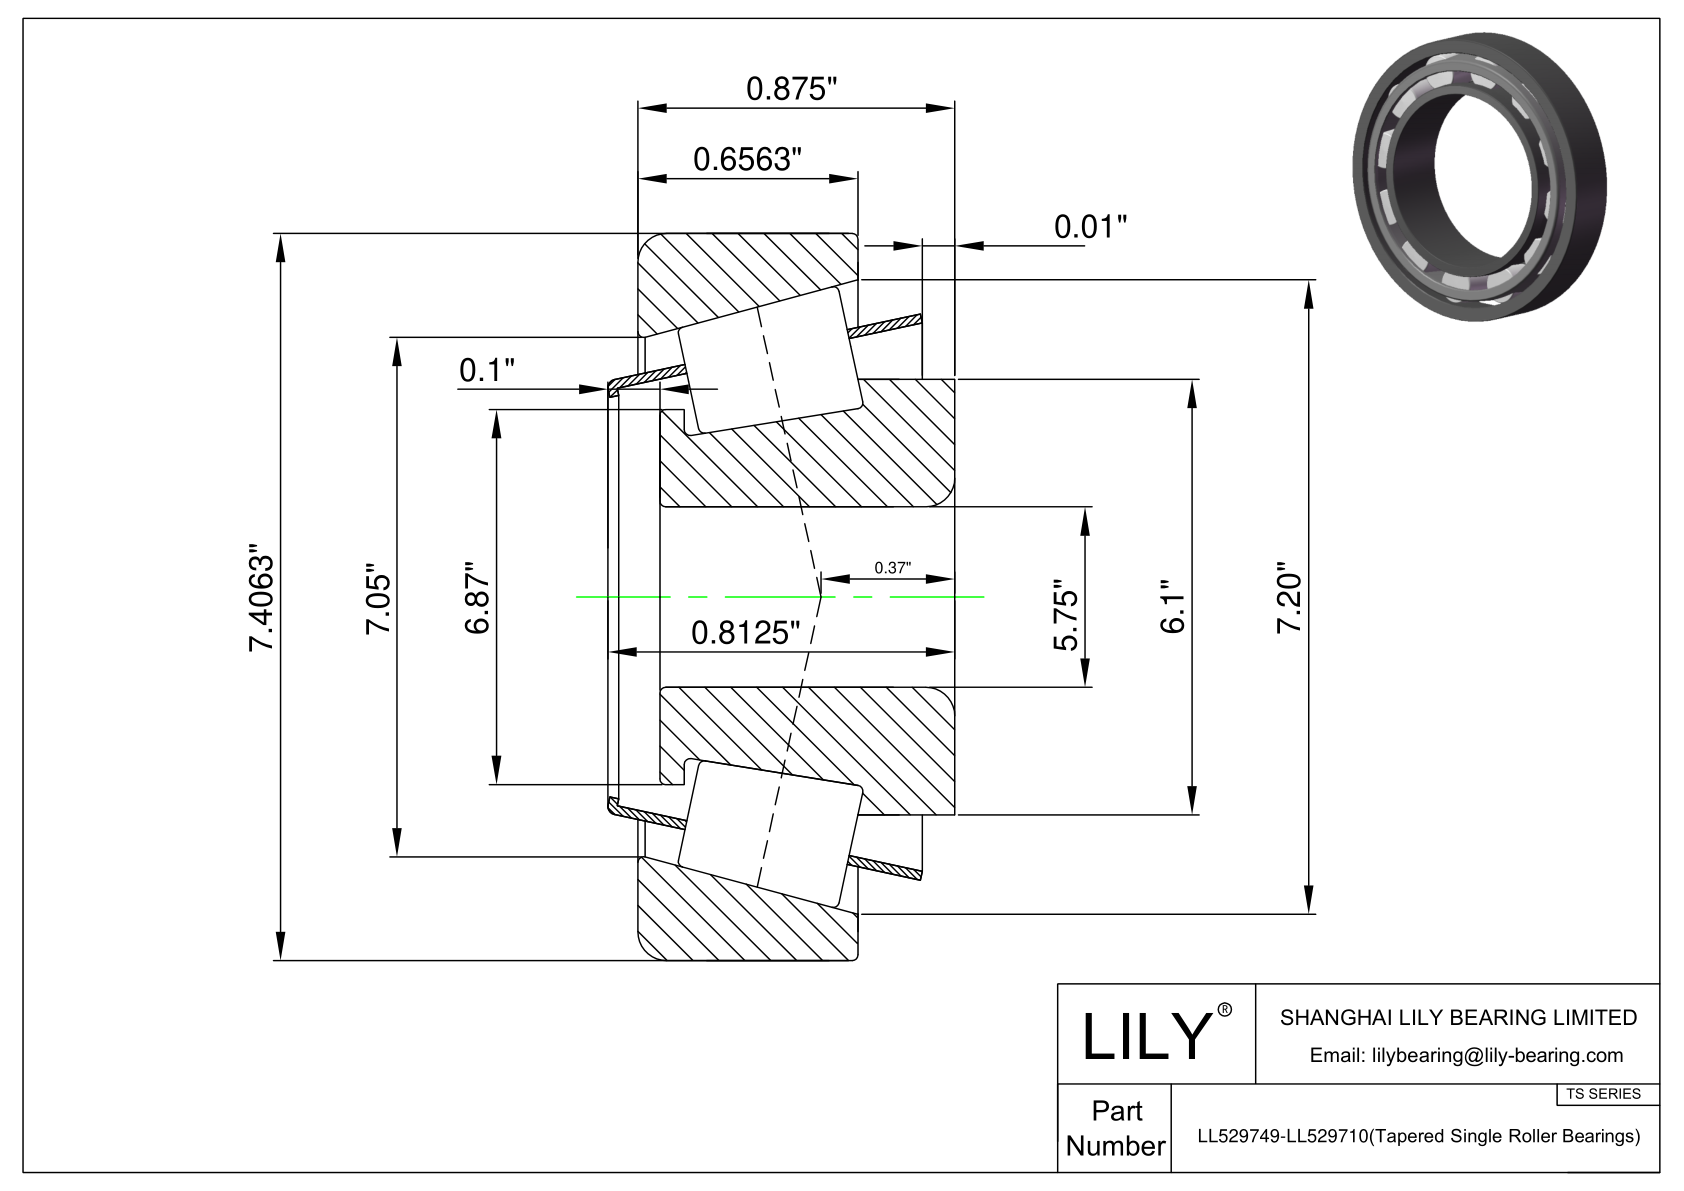 LL529749-LL529710 TS (Tapered Single Roller Bearings) (Imperial) cad drawing